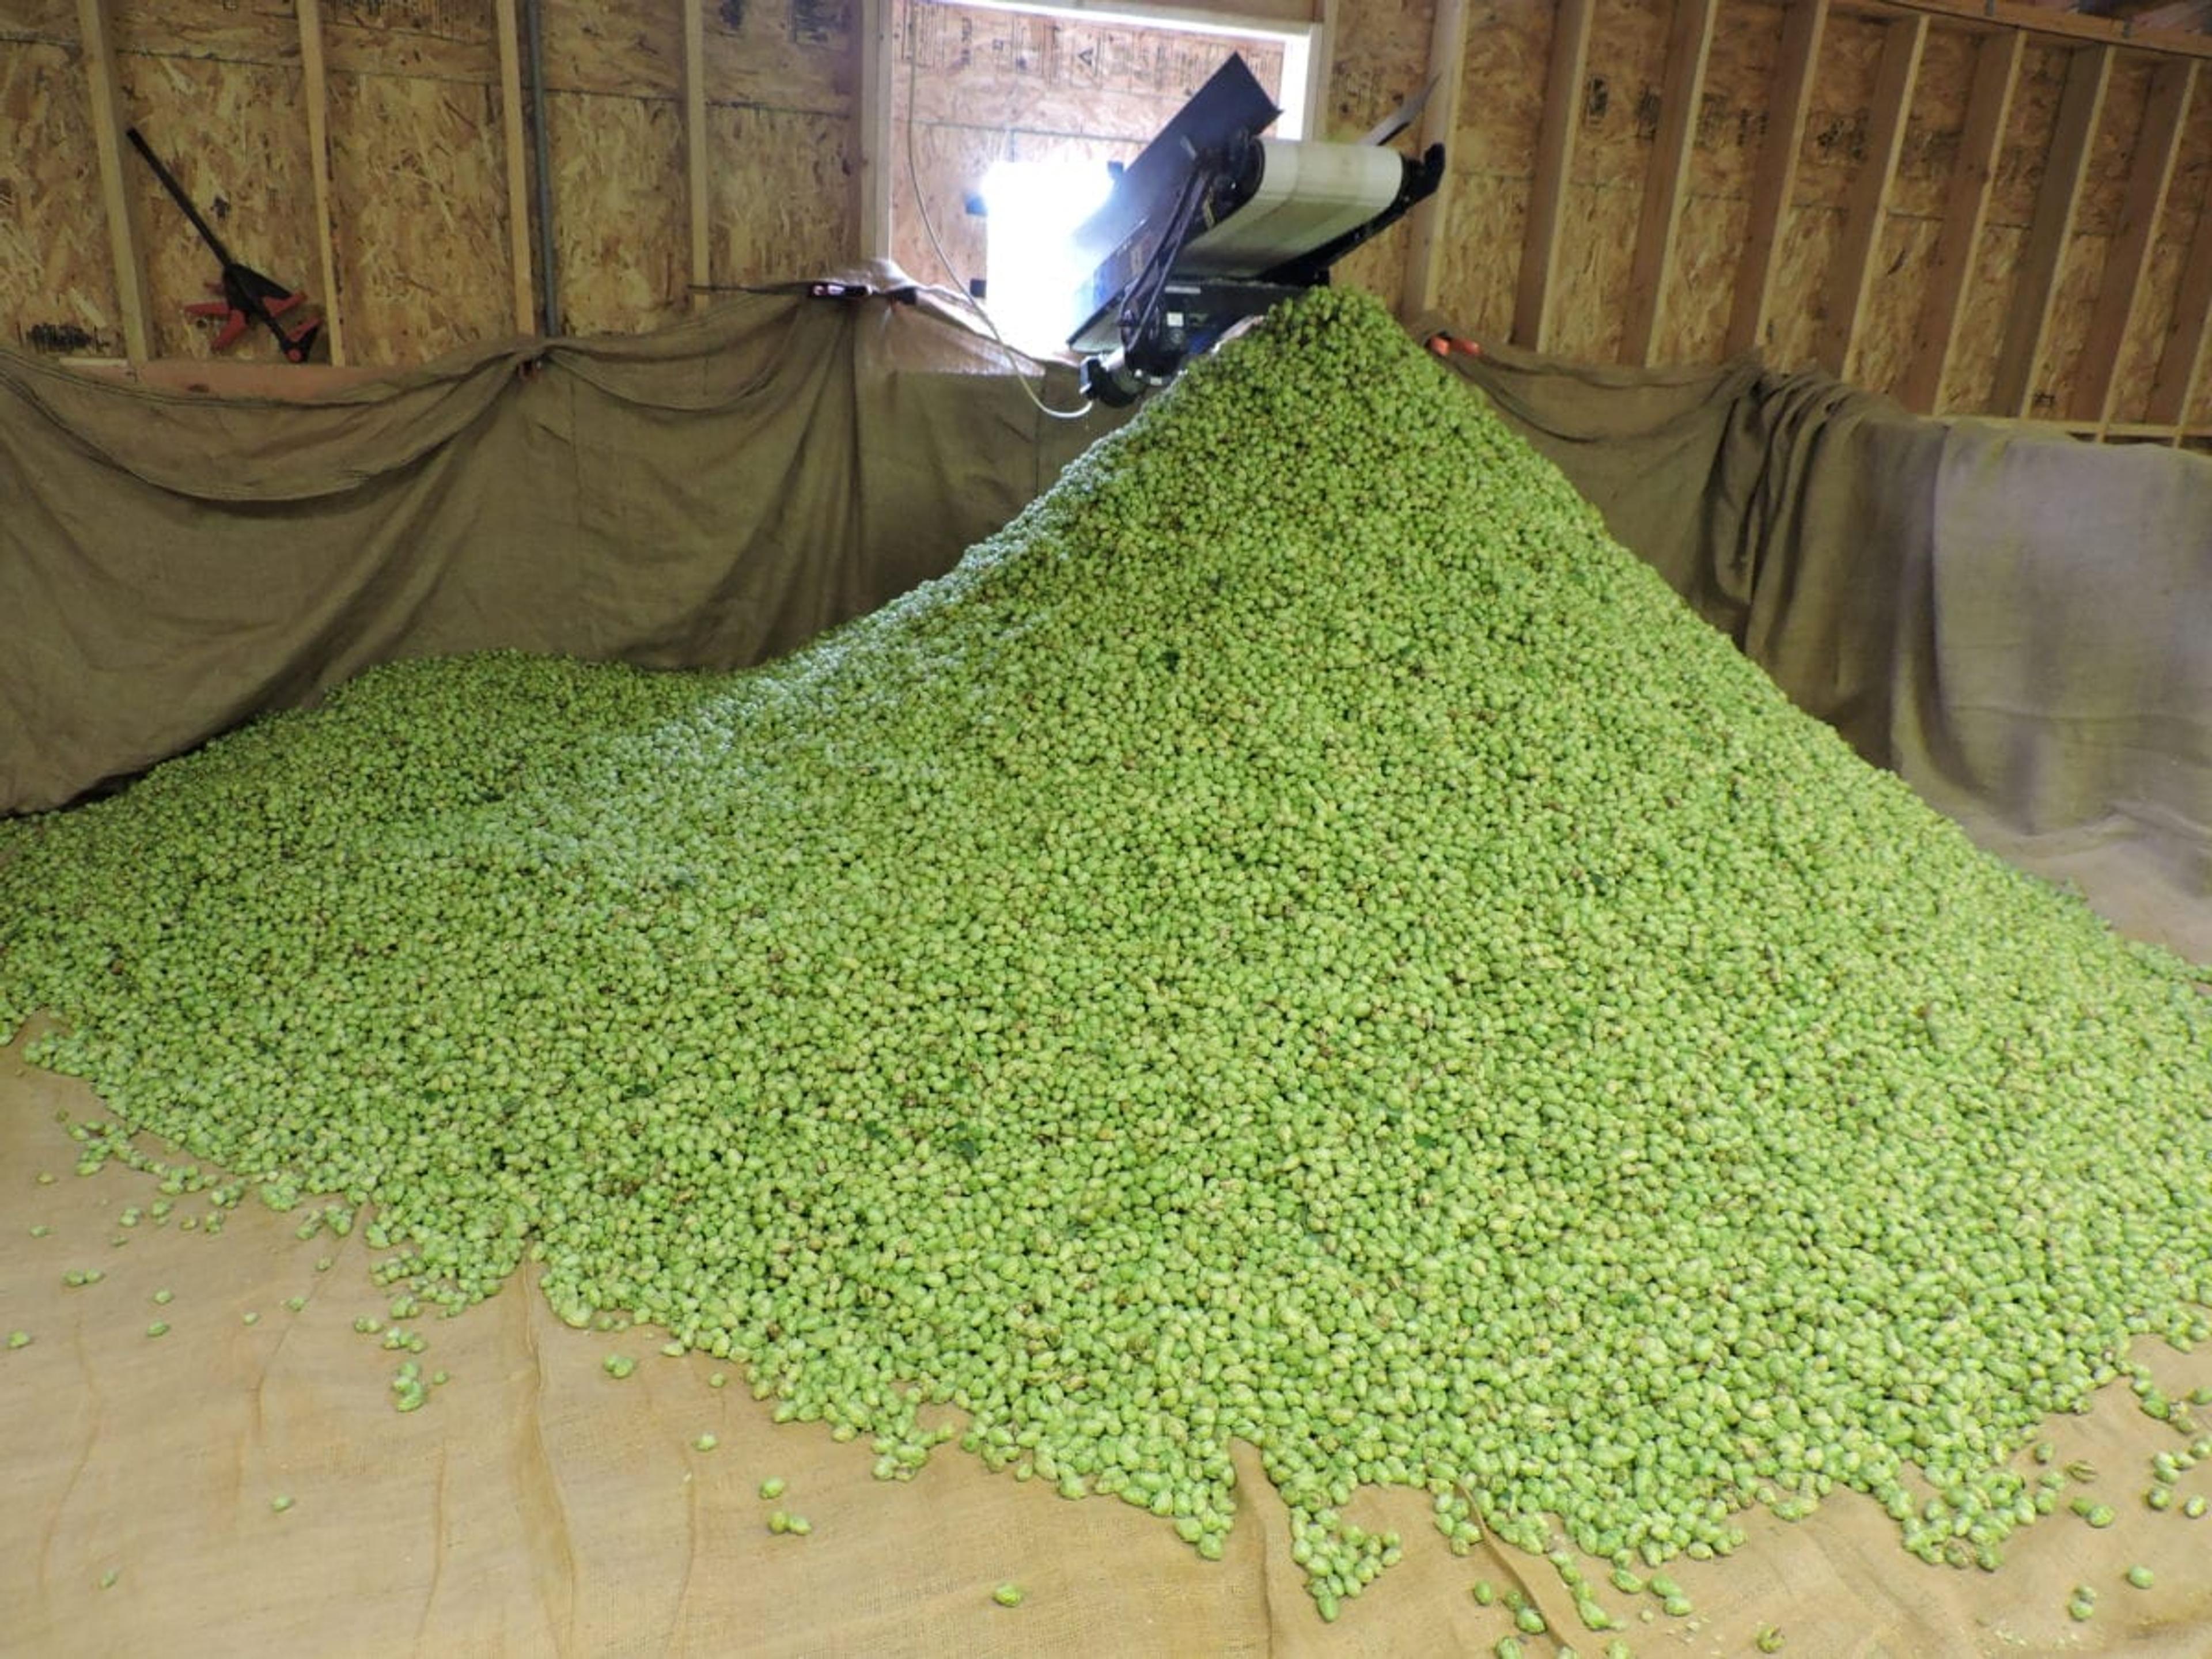 Hops ready to be dried and processed.